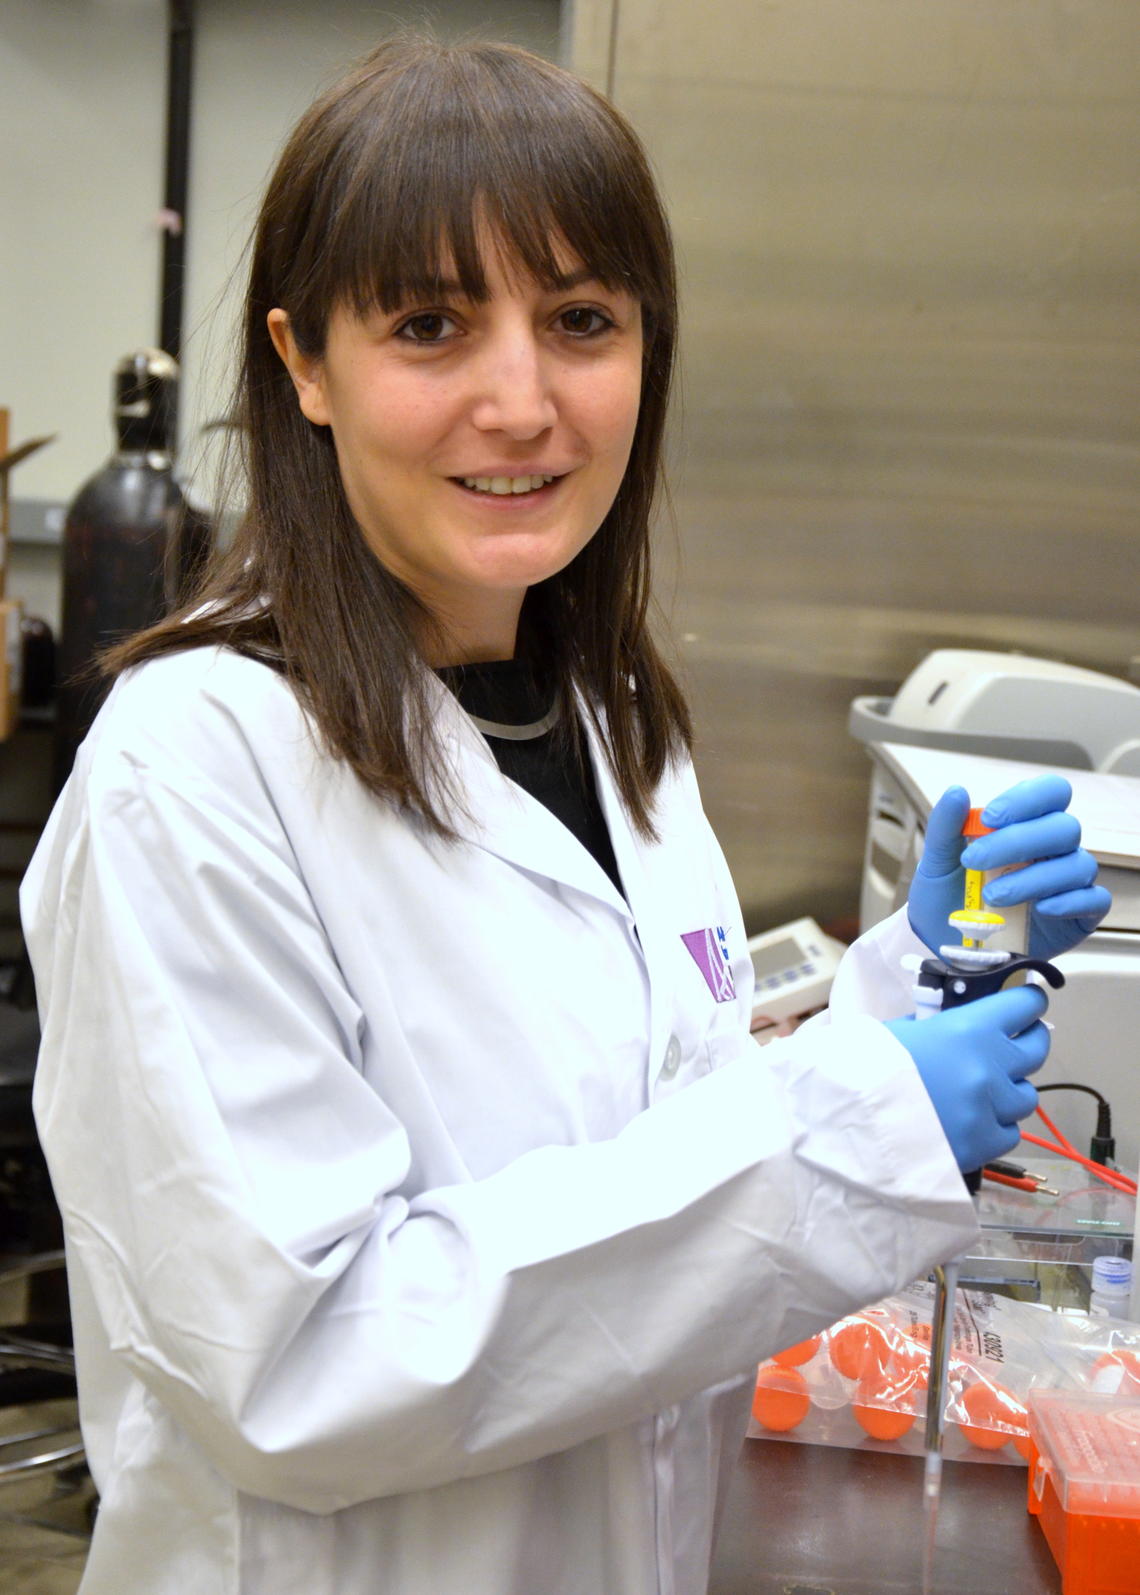 Italian postdoctoral researcher Maria Morena came to the University of Calgary to work with Matthew Hill, PhD, Canada Research Chair in Neurobiology in the Cumming School of Medicine. She hopes her look into the brain's chemistry and circuitry will reveal what causes post-traumatic stress disorder and new approaches to treat it.